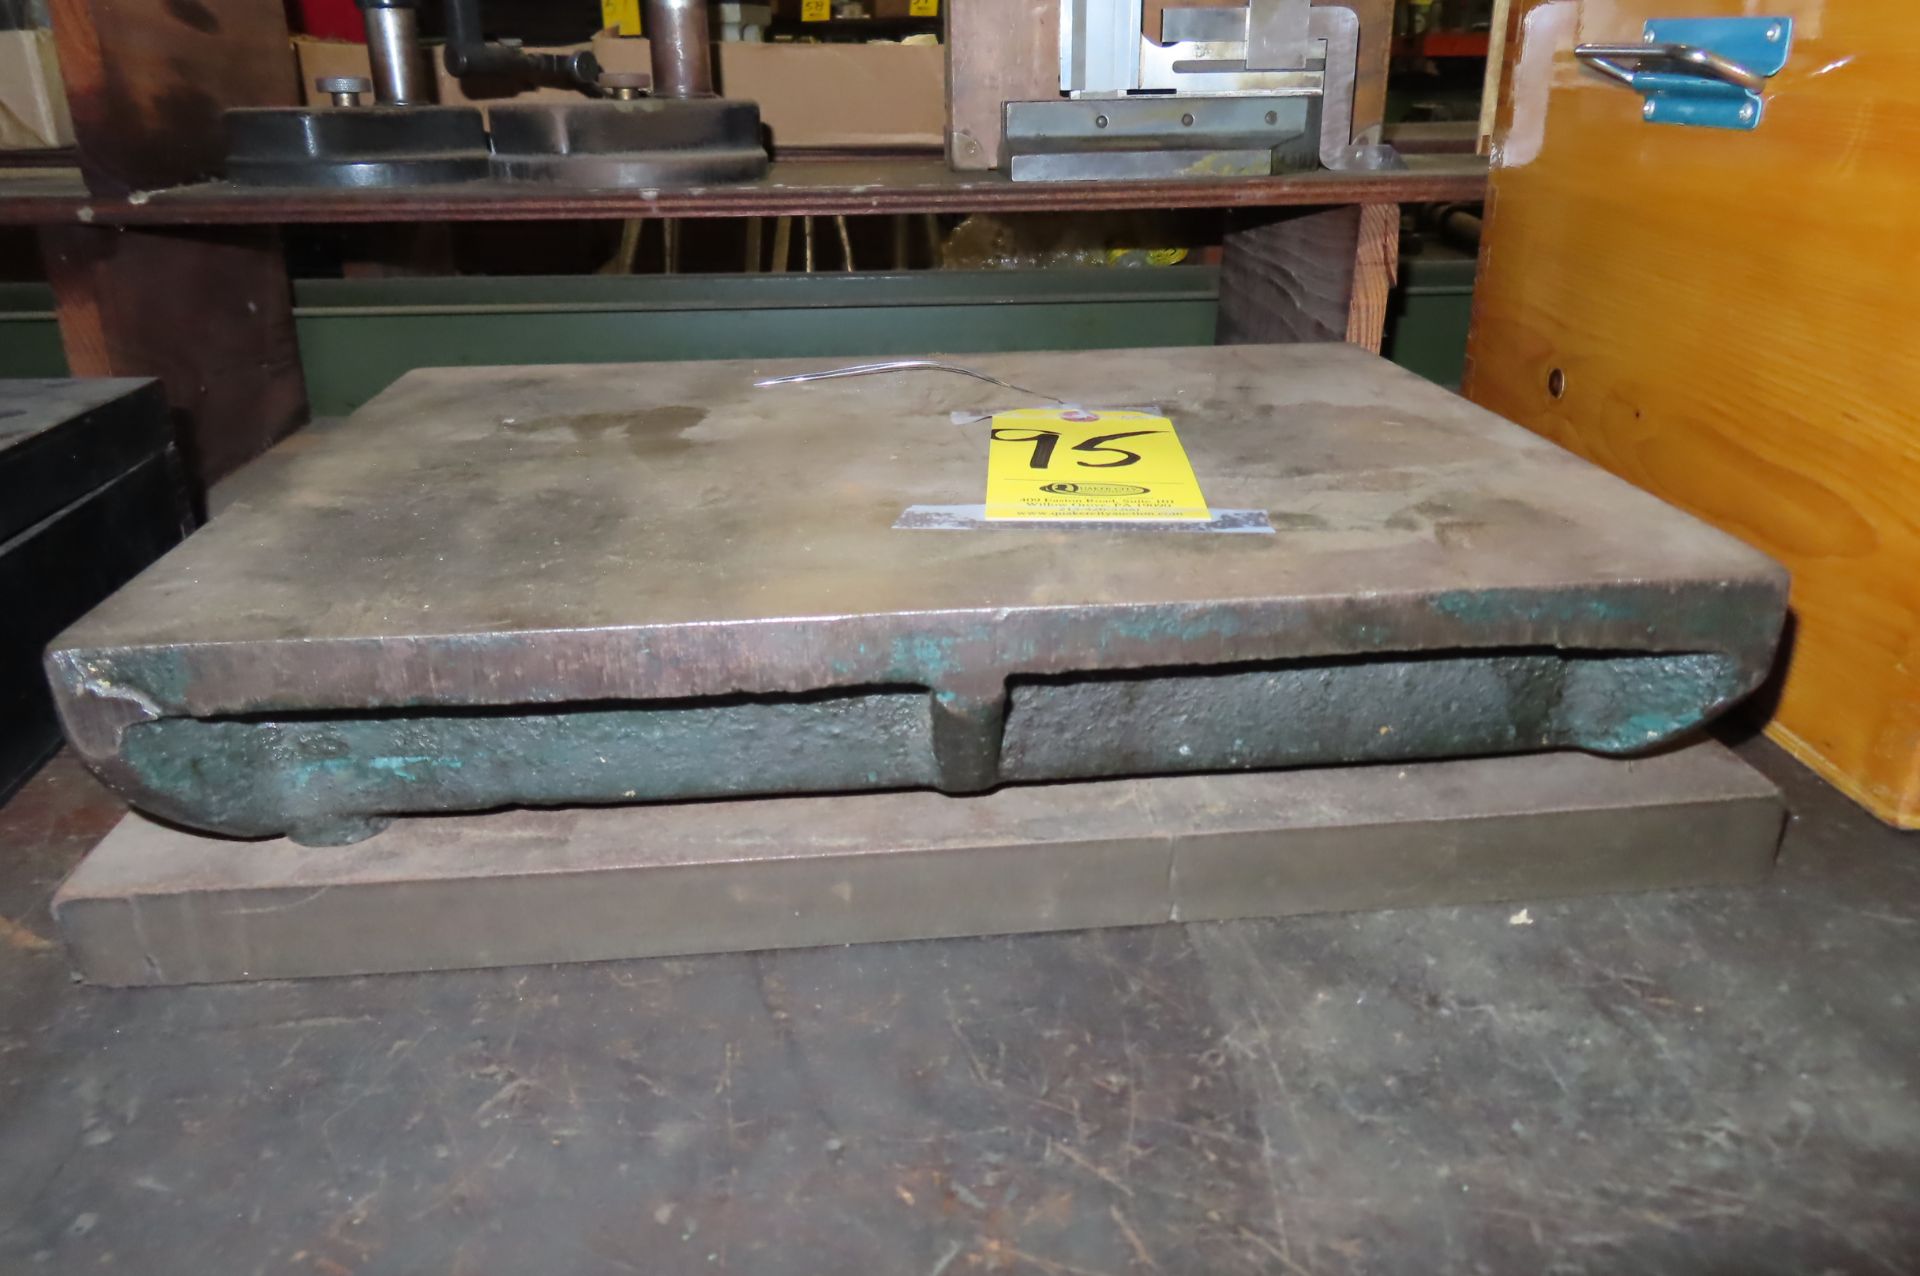 12 IN. X 16 IN. IRON SURFACE PLATE AND 14 IN. X 17 IN. STEEL PLATE